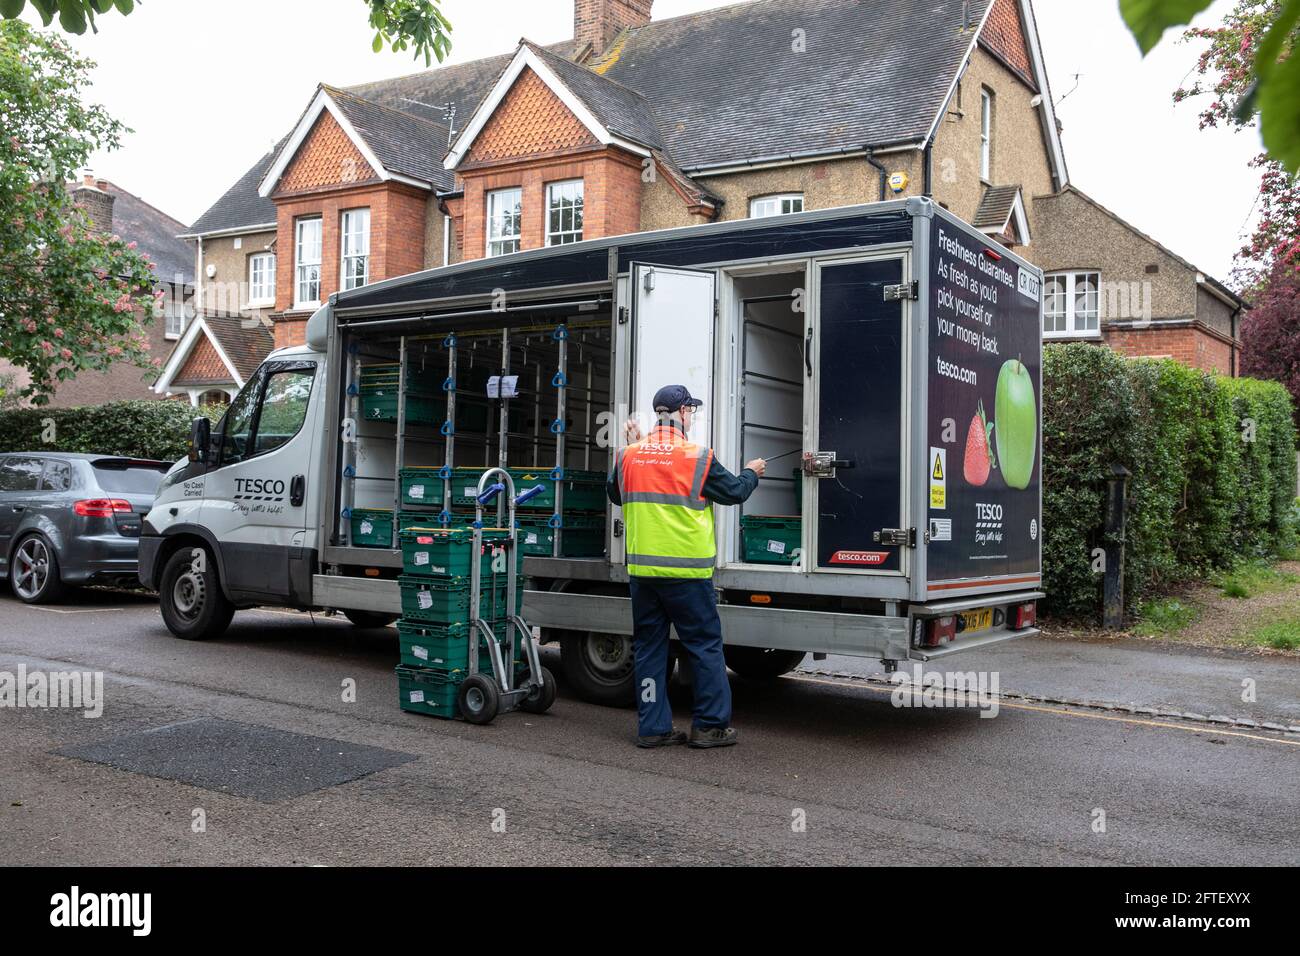 Tesco delivery van on a residential street in Southwest London, England, United Kingdom Stock Photo